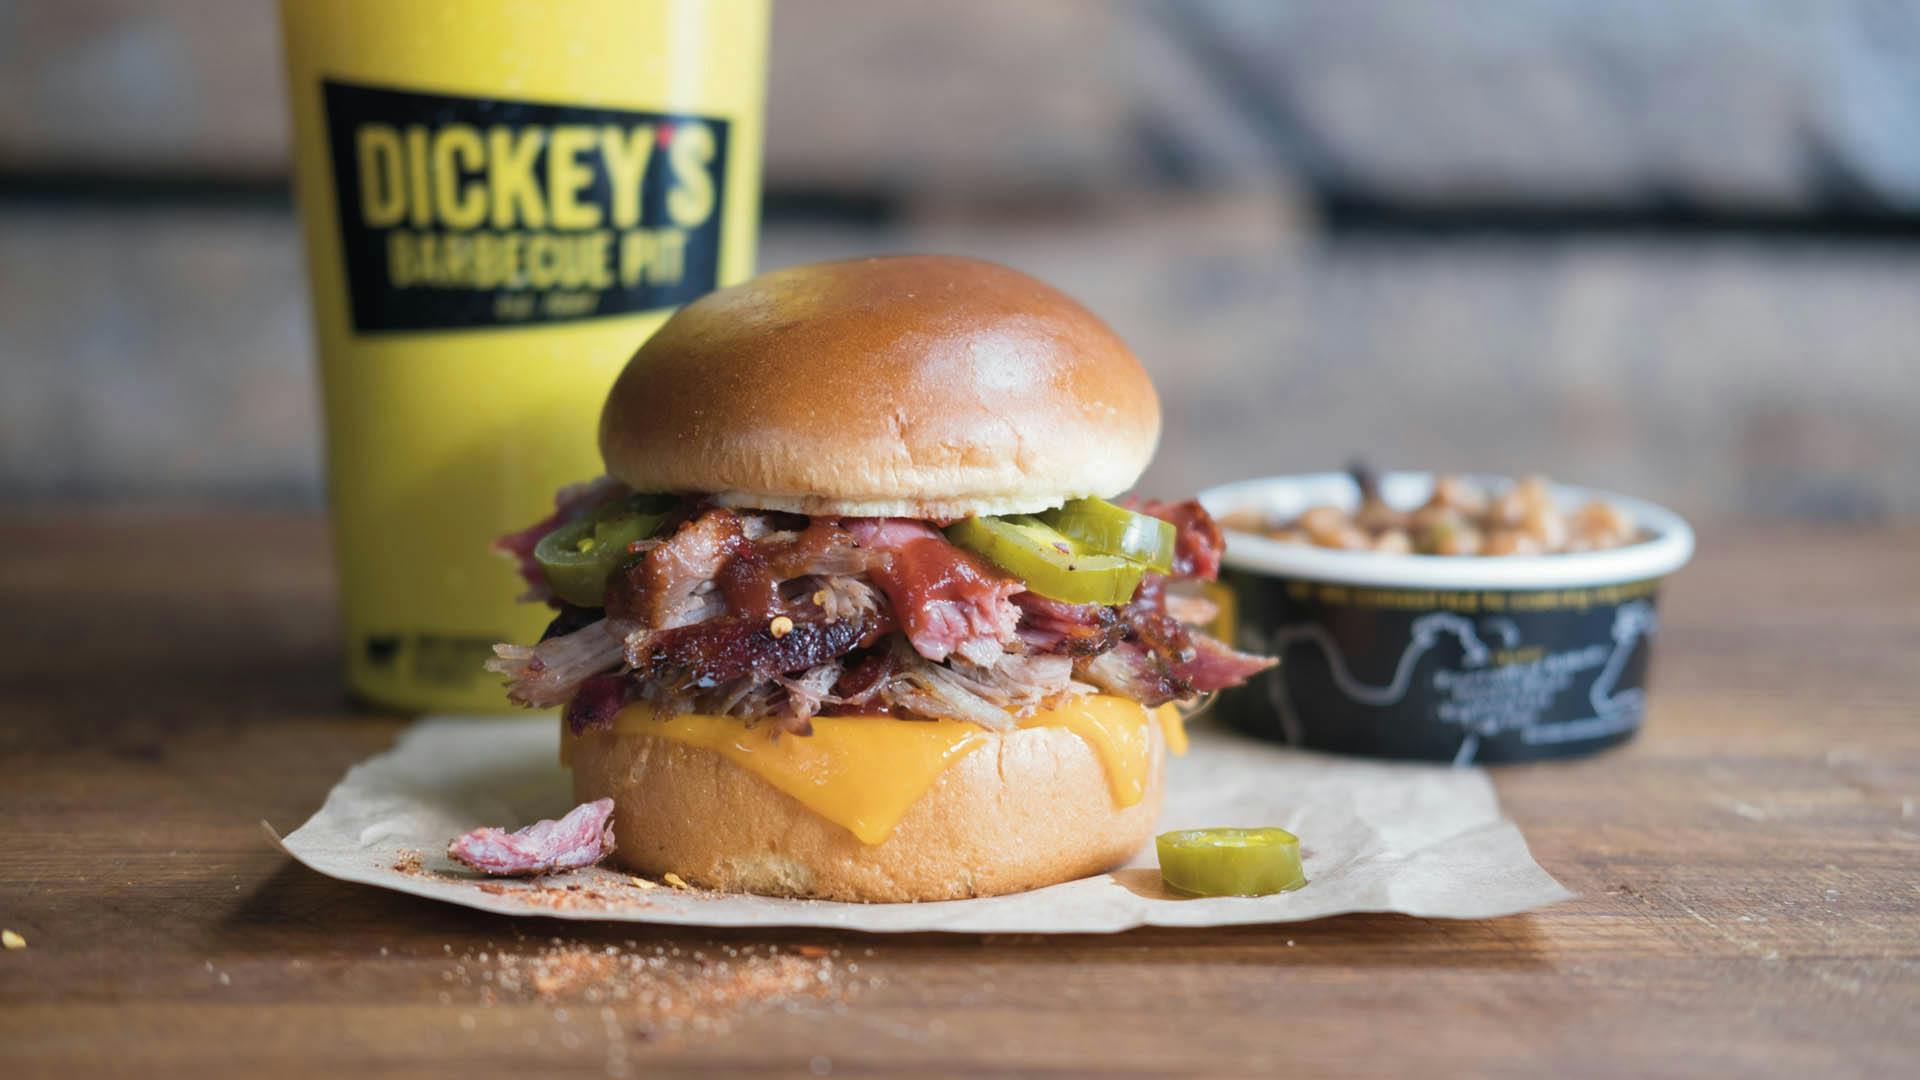 Verdict: New Openings – FAT Brands, Dickey’s Barbecue Pit and Captain D’s